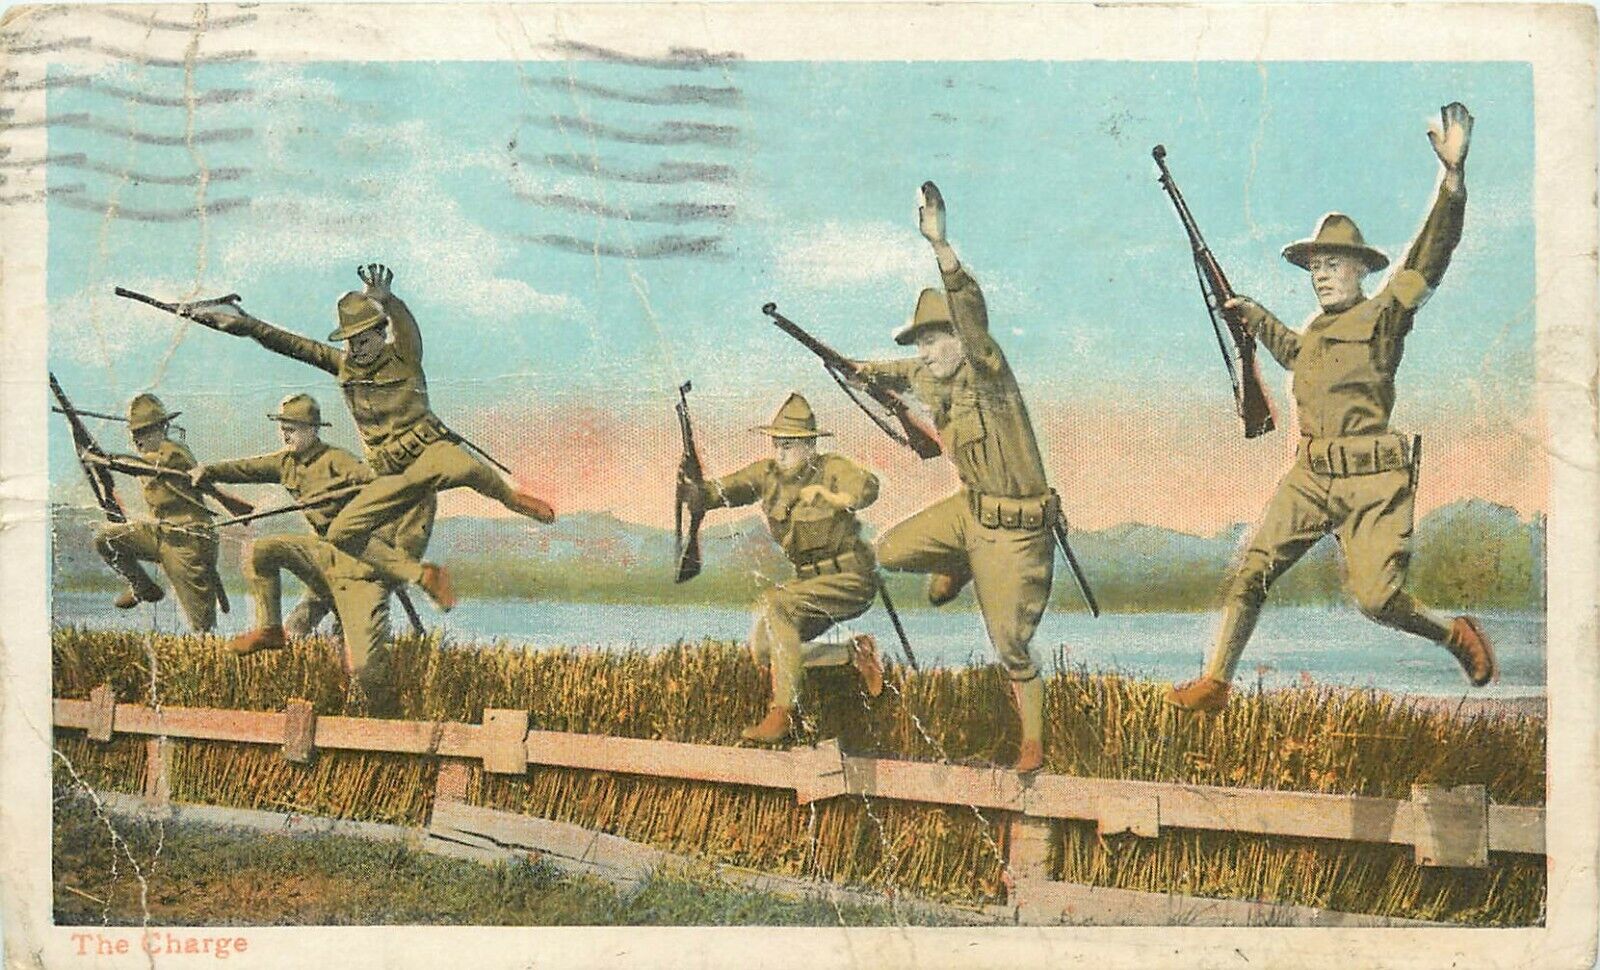 The Charge WWI World War I Soldiers Hurdle Jumping US Army pm 1917 Postcard